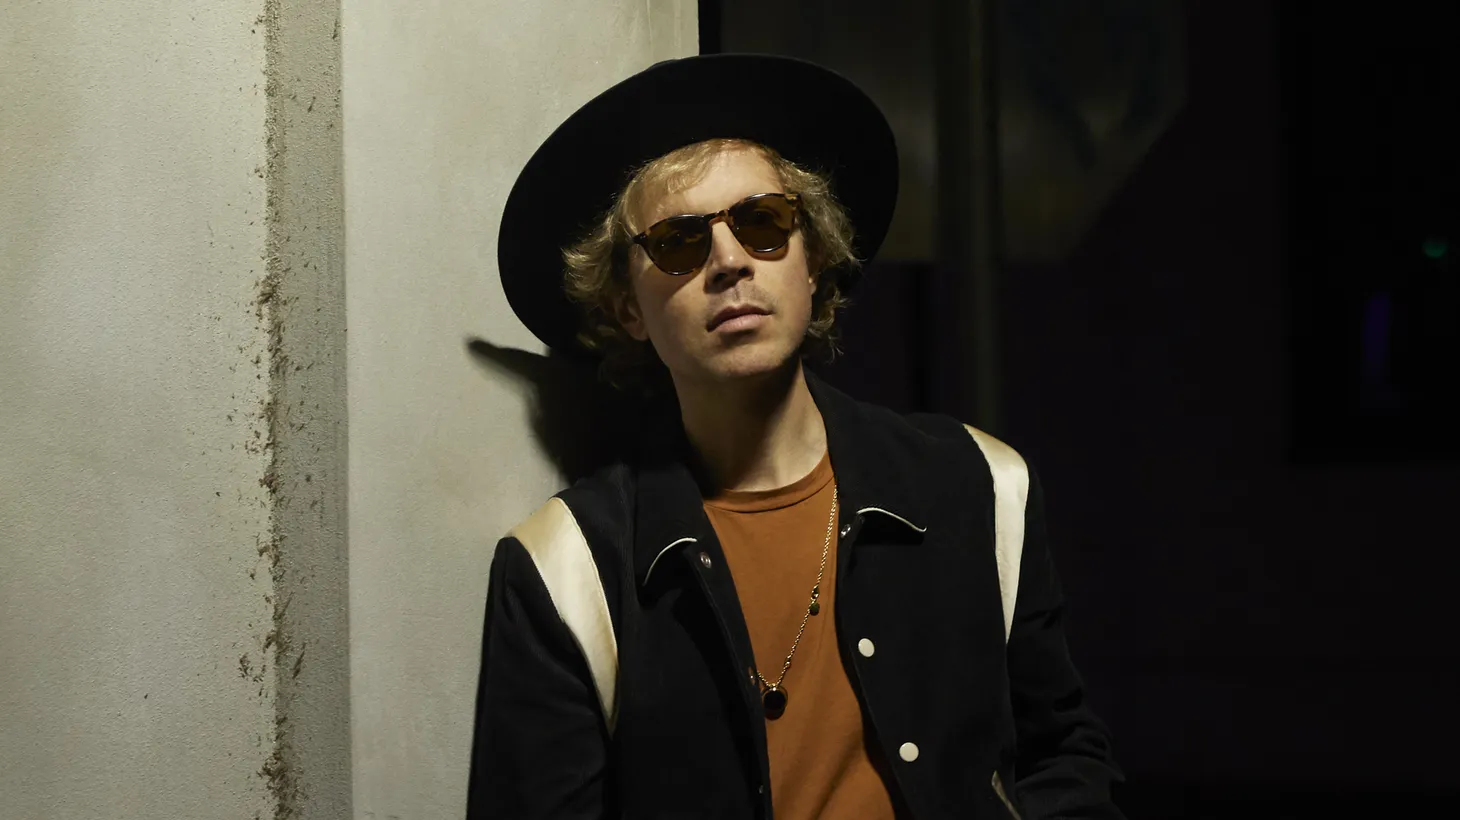 In 2008, Beck teamed up with super producer Danger Mouse for the critically acclaimed album Modern Guilt. The album blends straight-ahead rock and roll with a sophisticated pop sensibility.